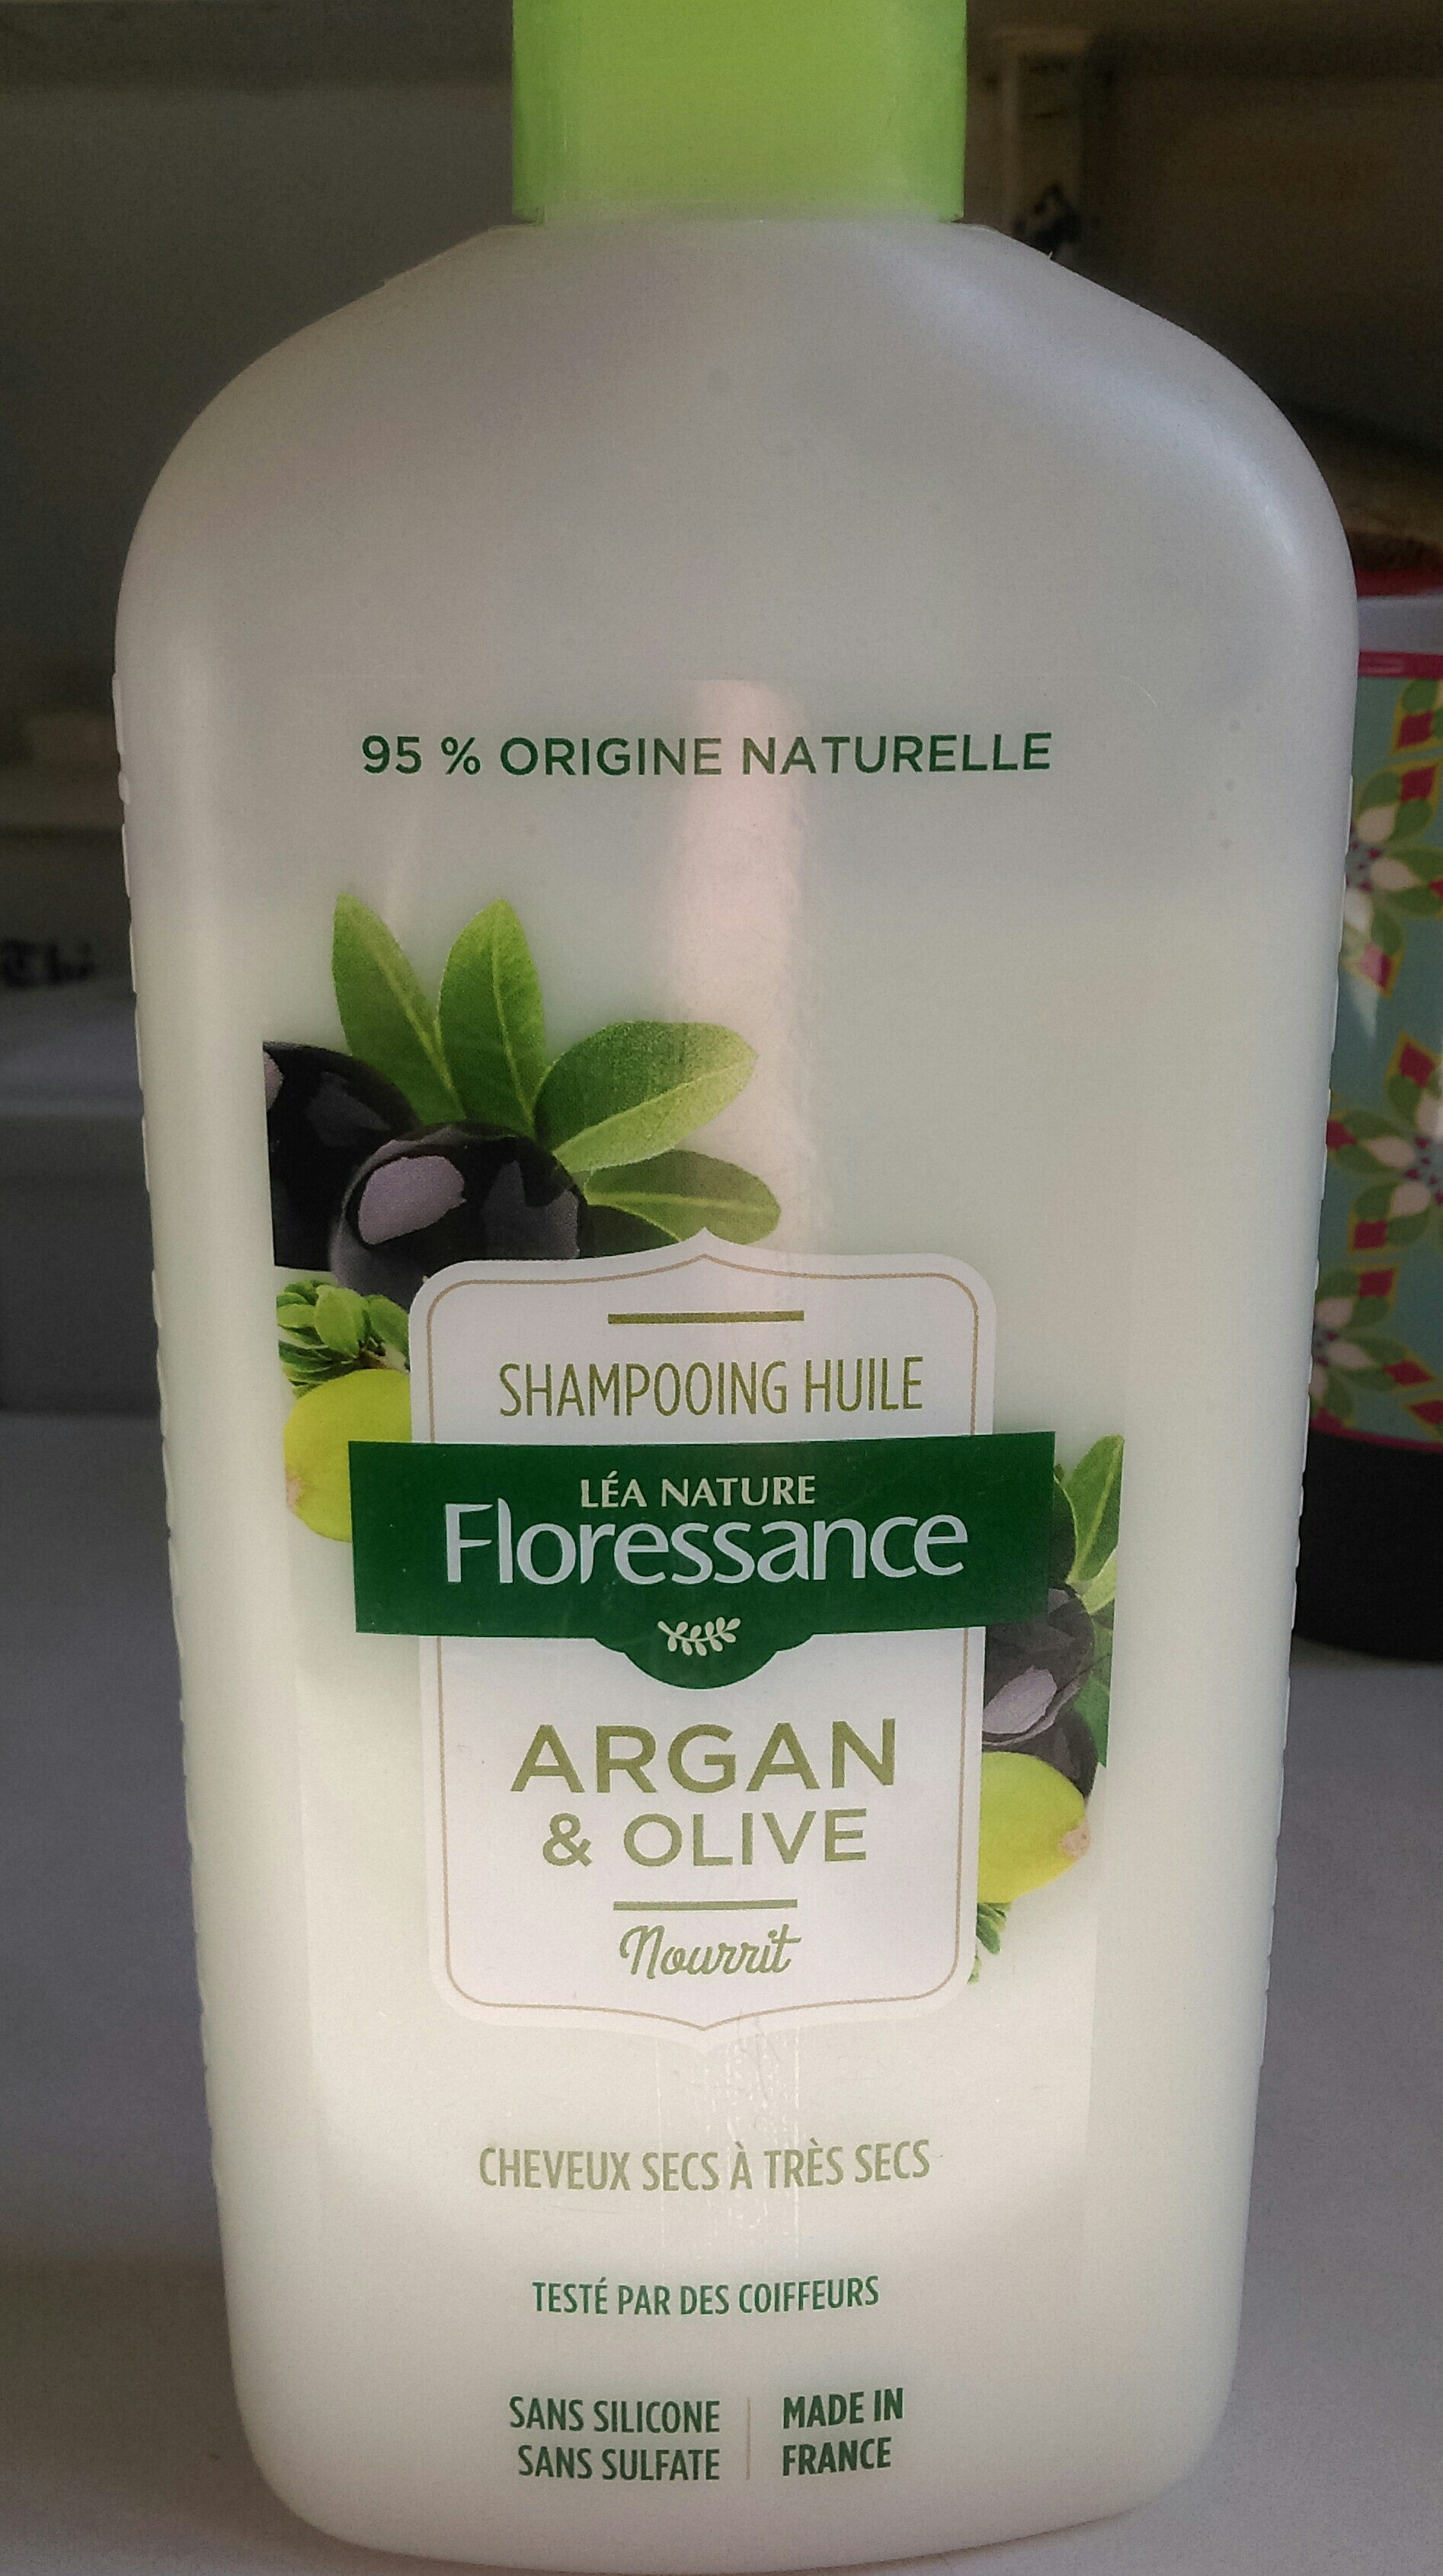 Shampooing huile Argan & olive - Tuote - fr